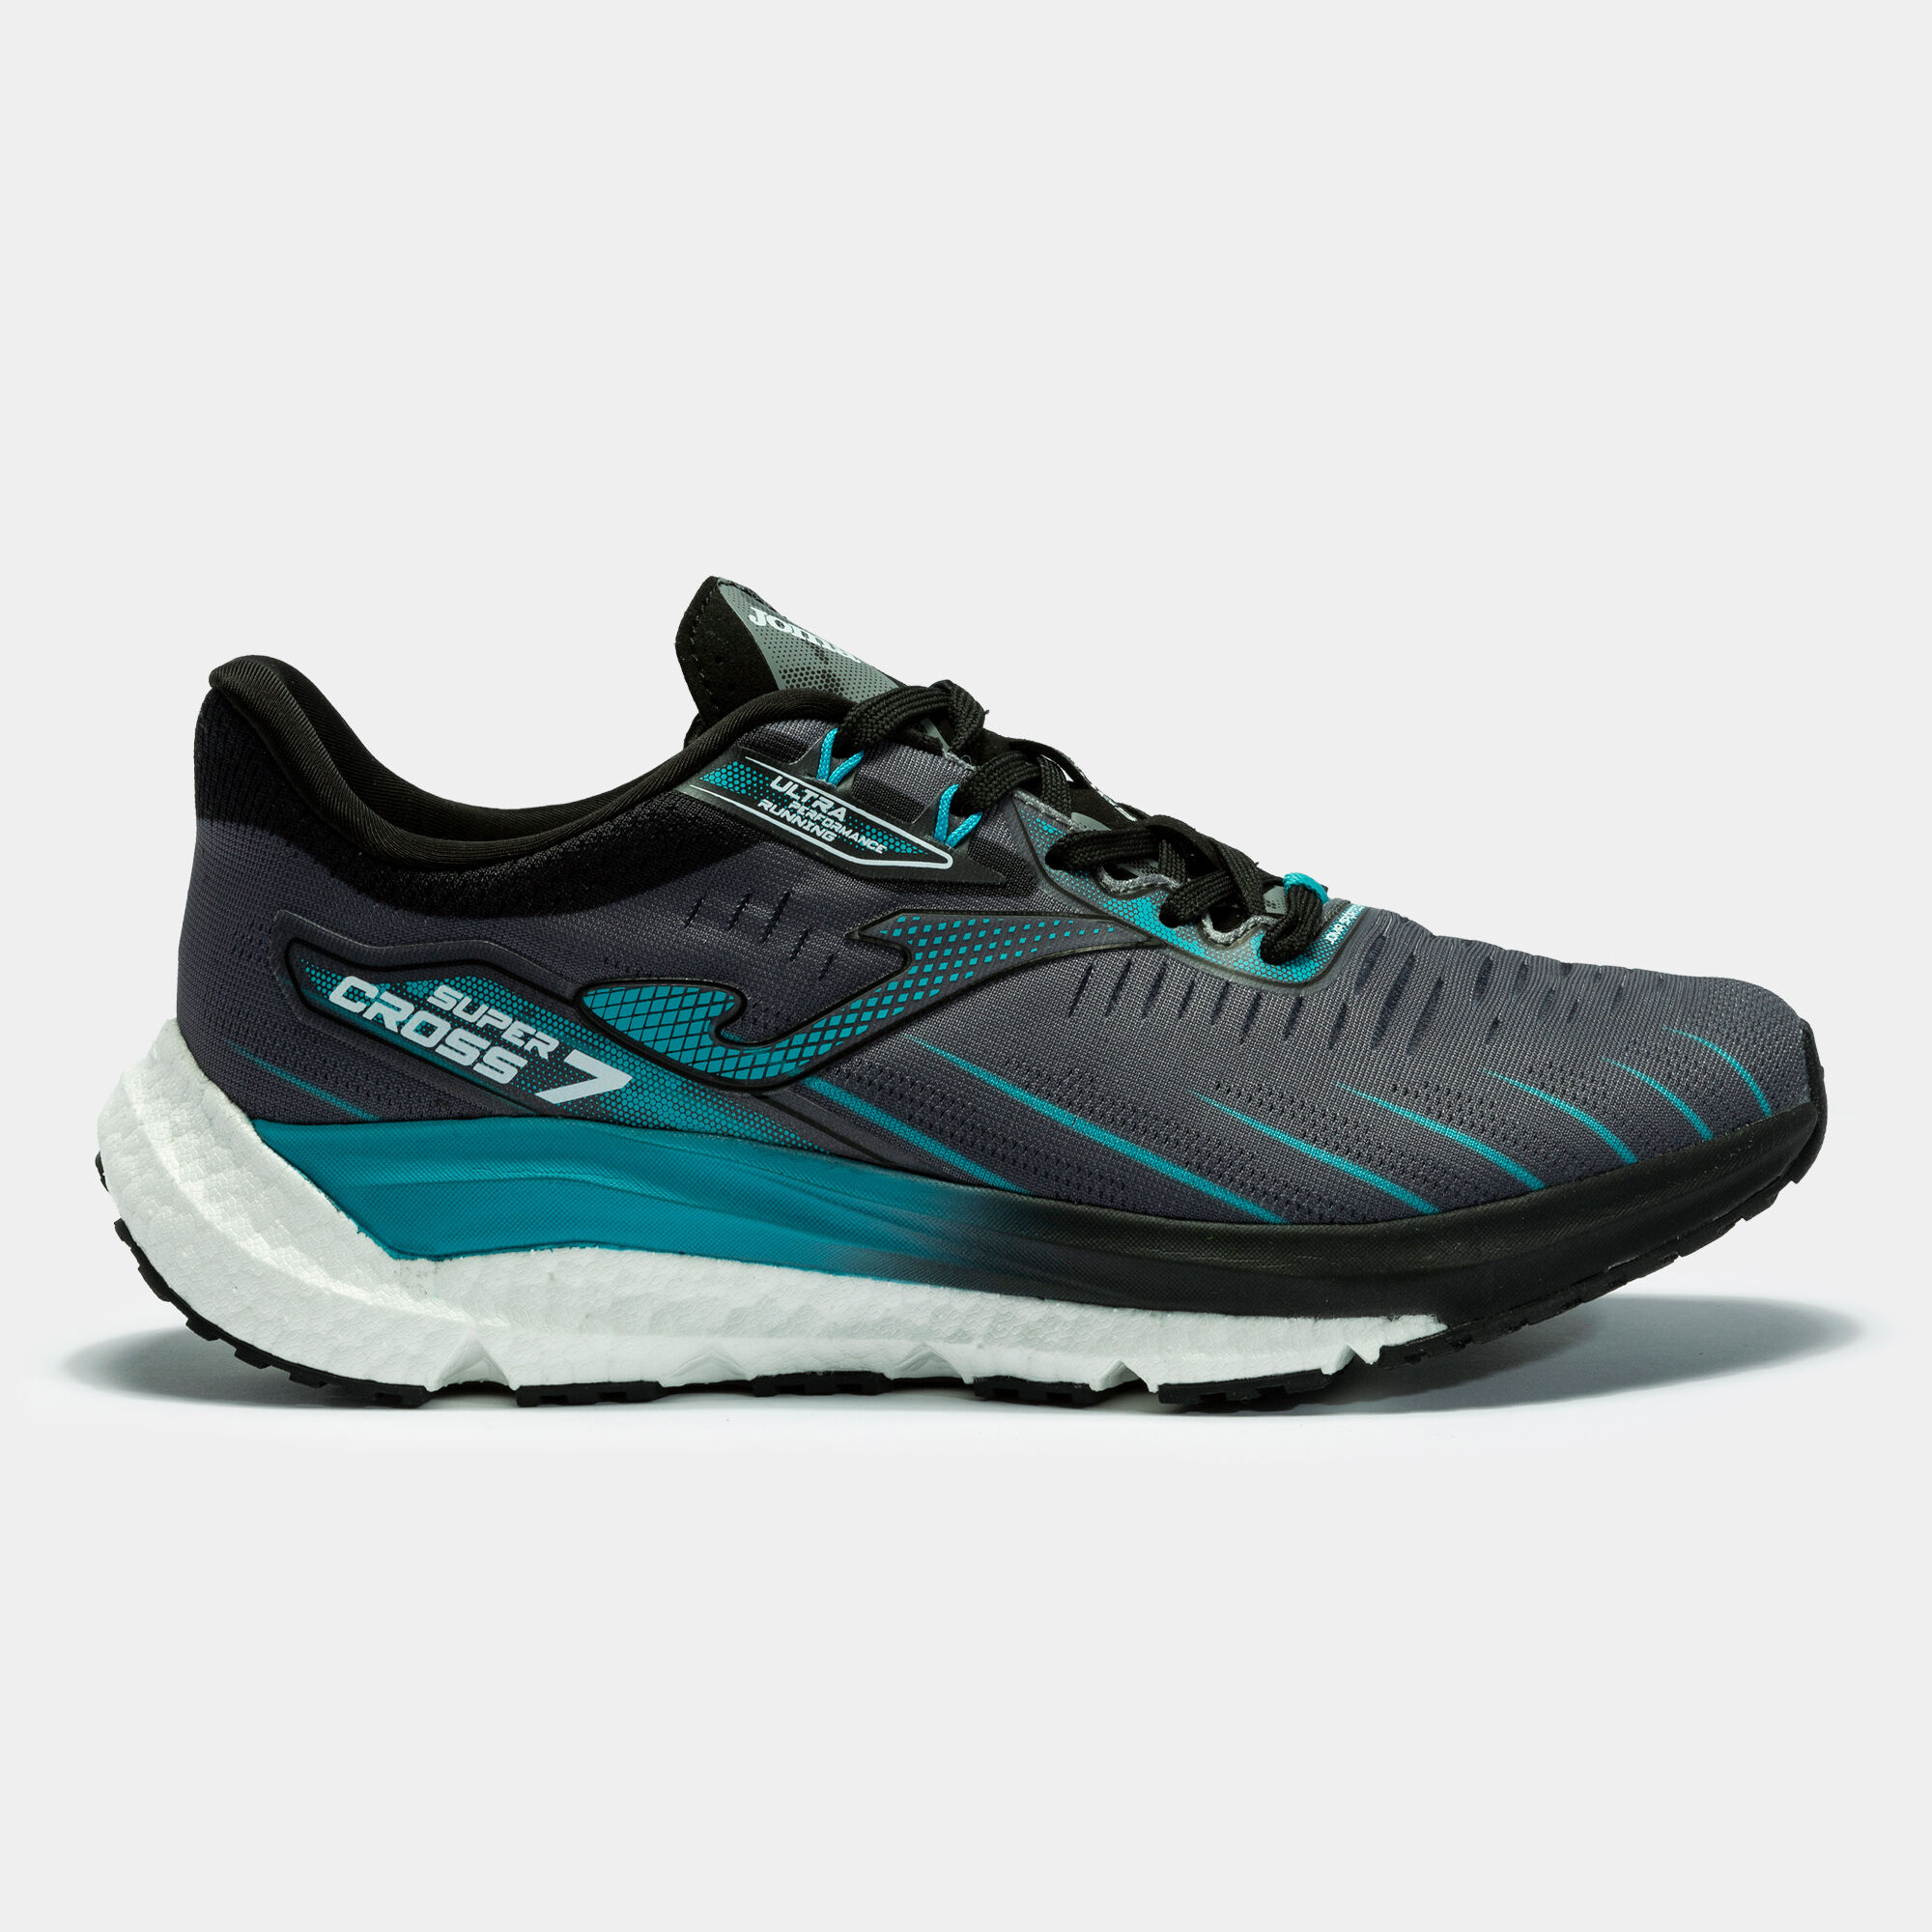 CHAUSSURES RUNNING SUPER CROSS 22 HOMME GRIS TURQUOISE